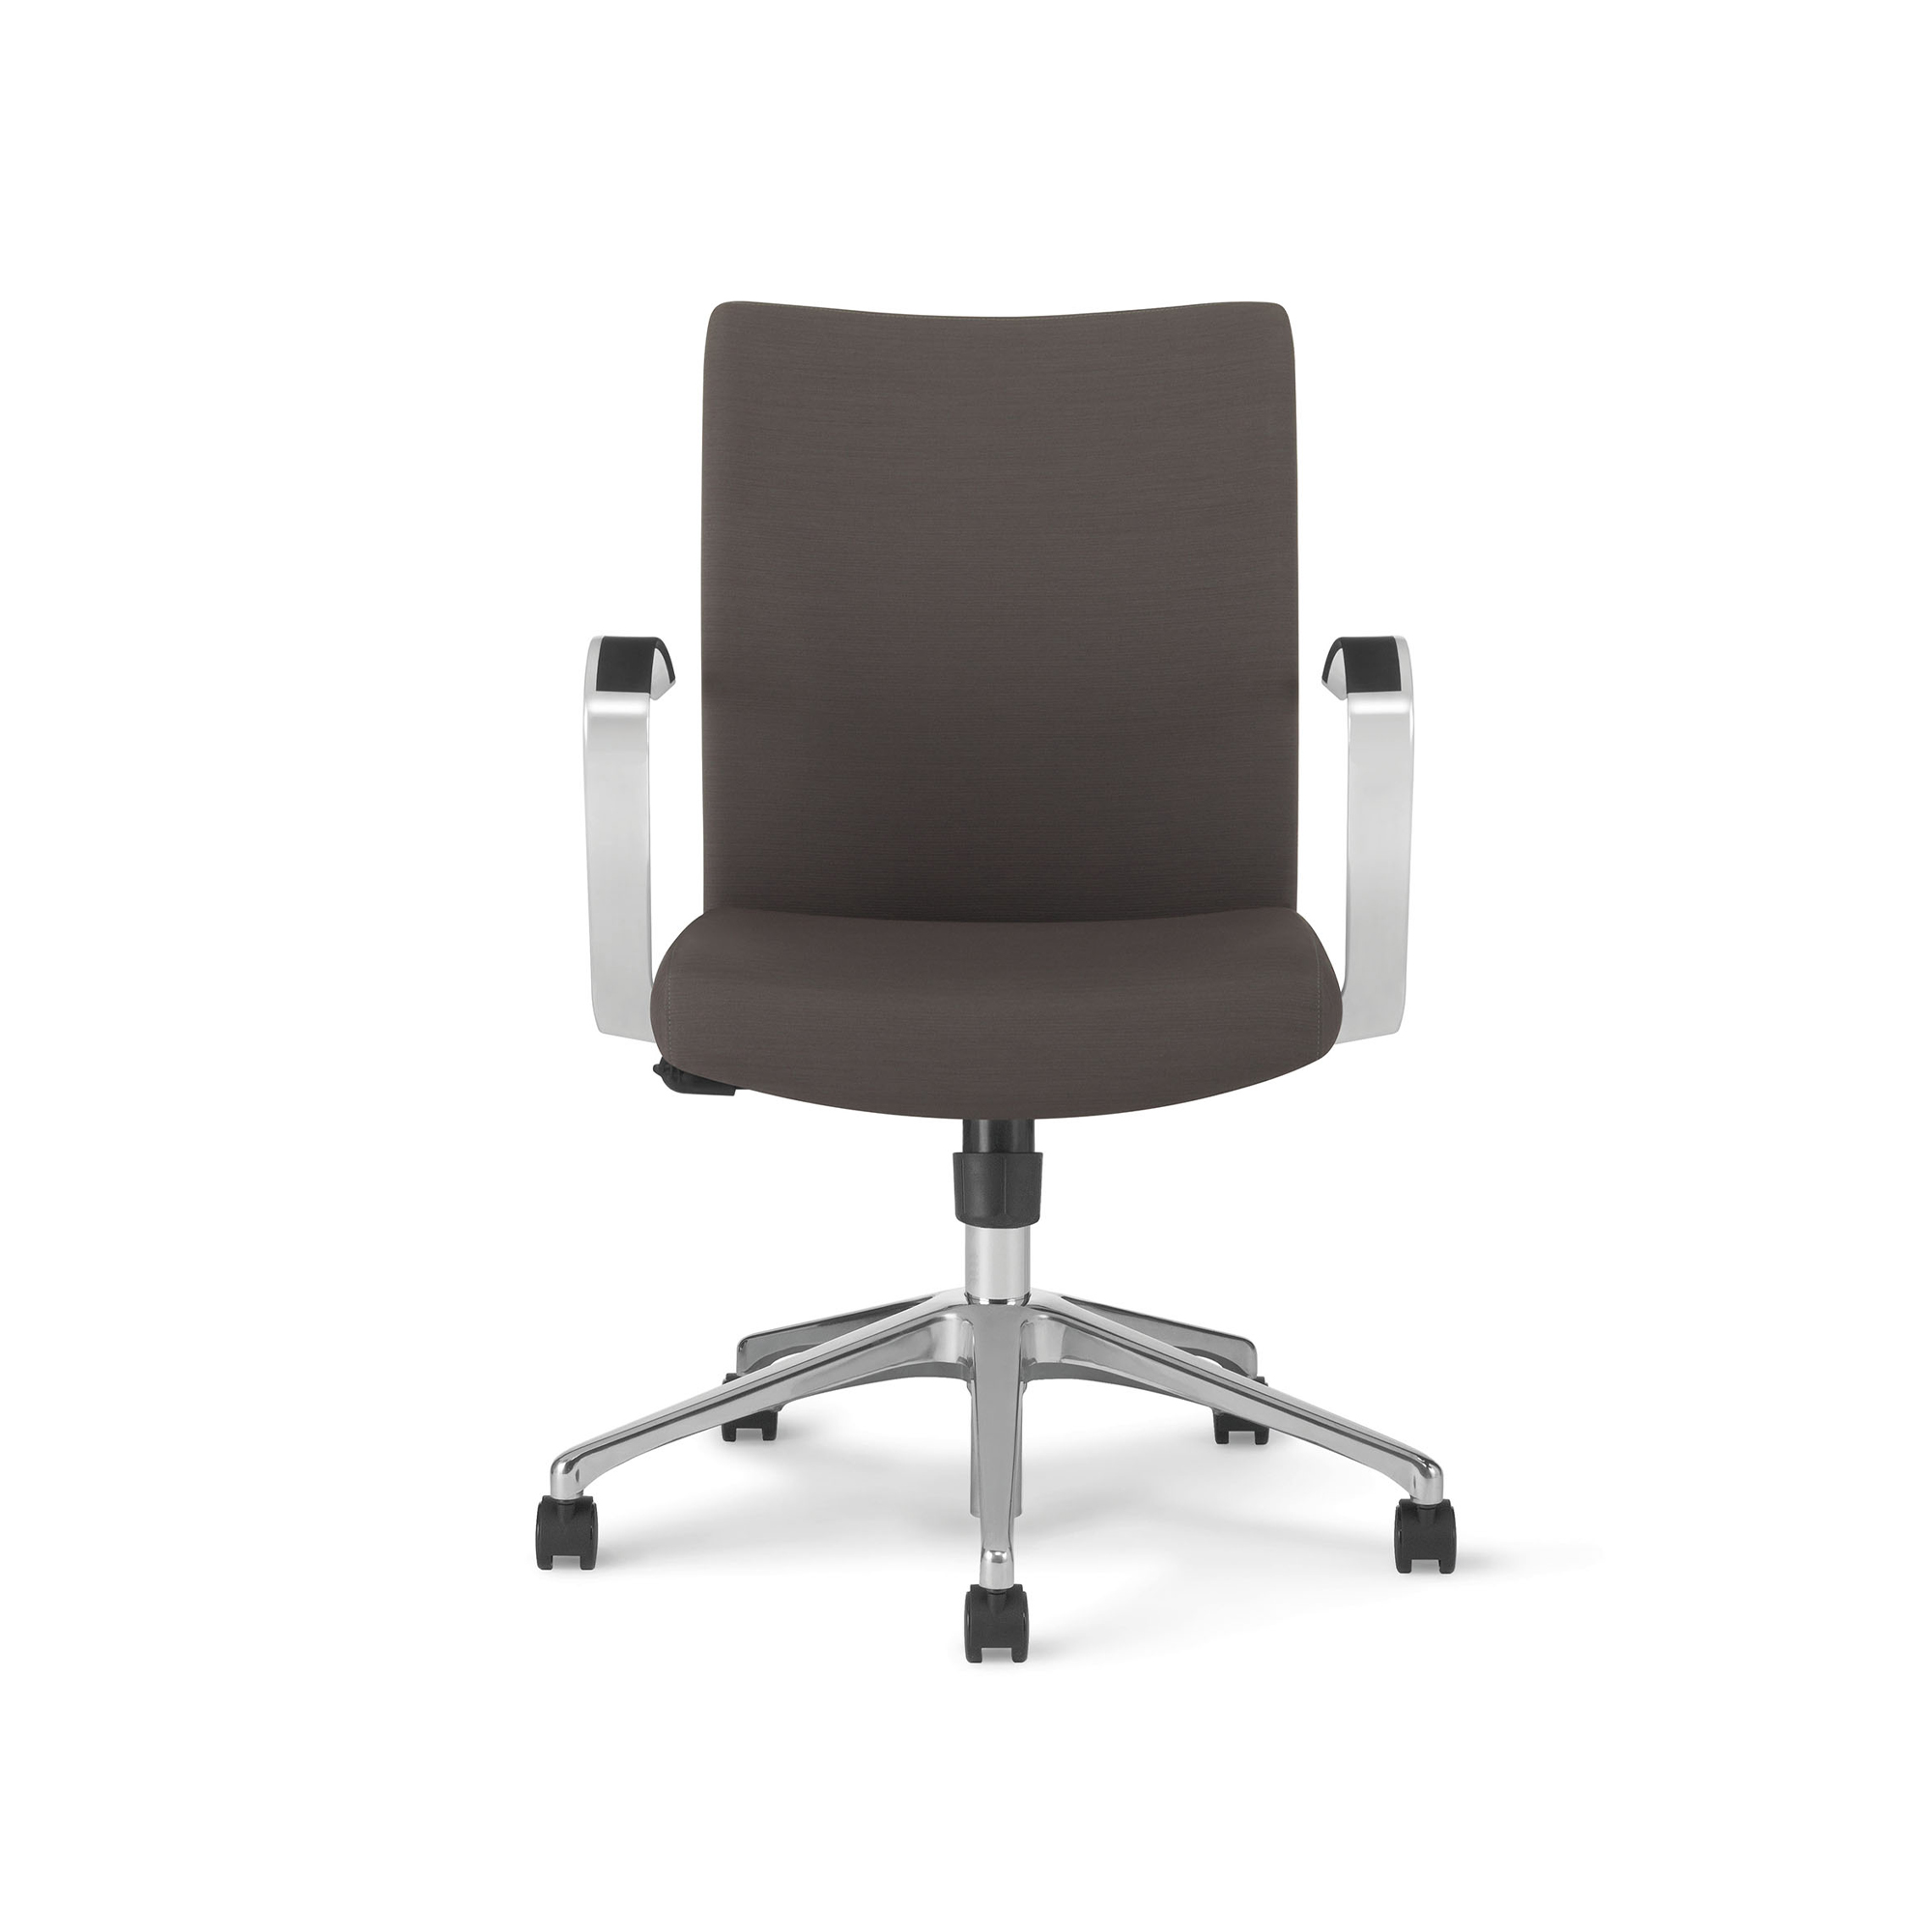 Memento Executive/Conference Chair, Cantilever Arms, Front View